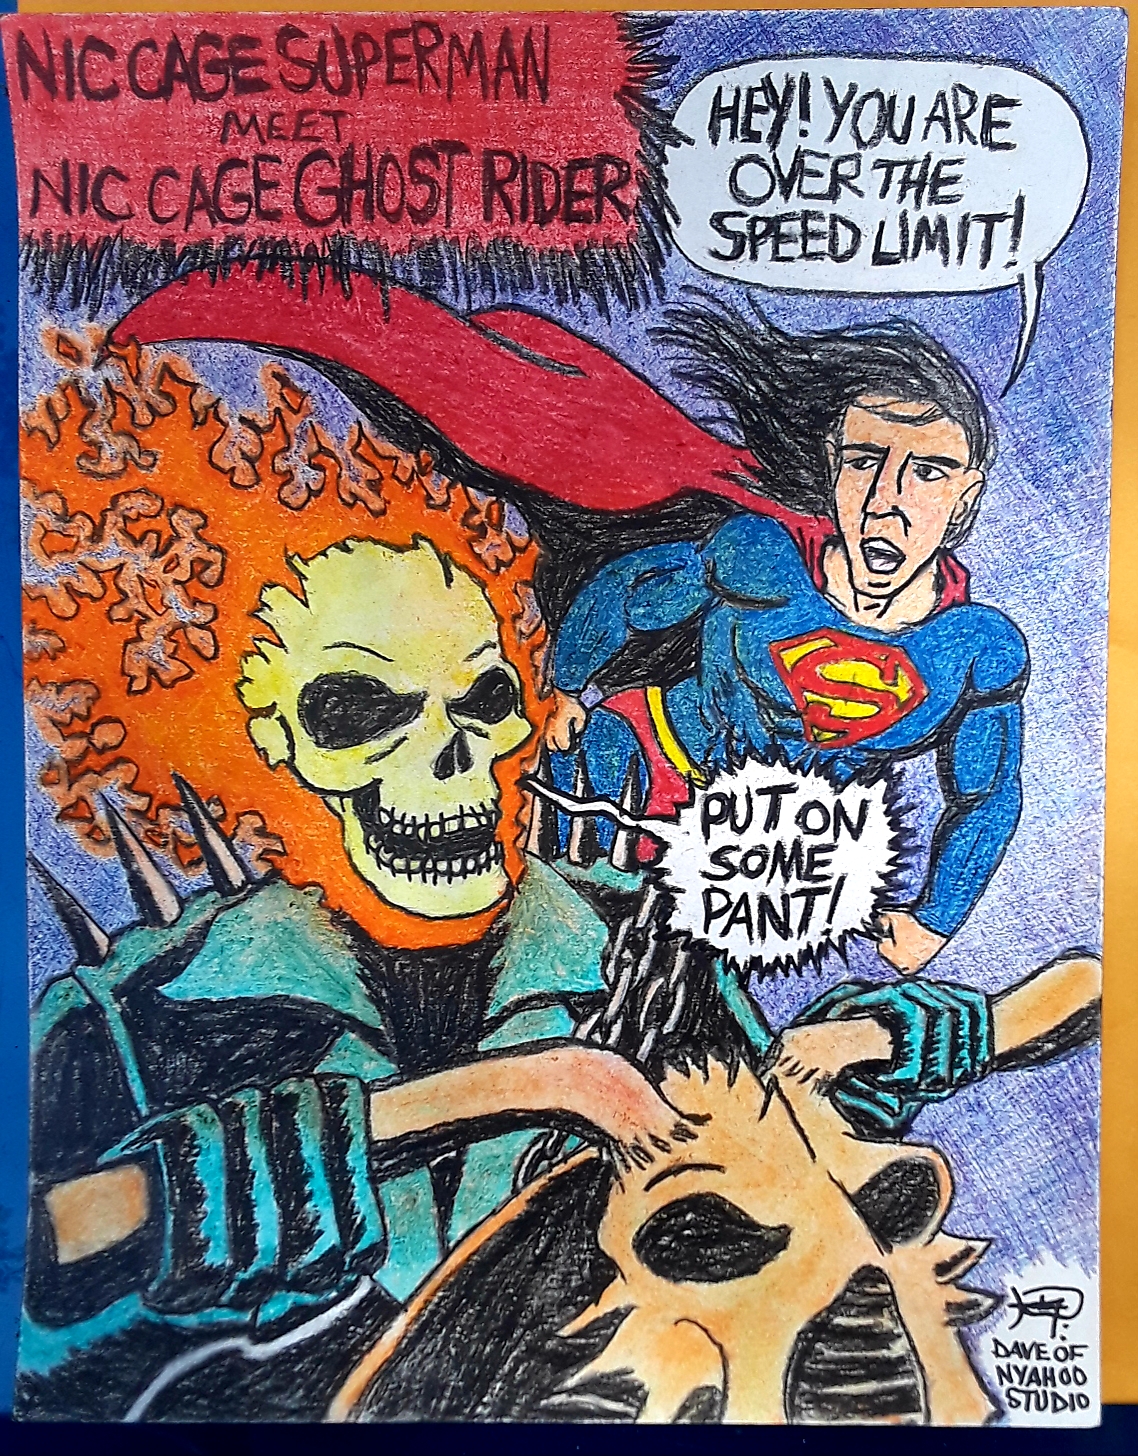 Nick Cage Superman meet Nick Cage Ghost Rider